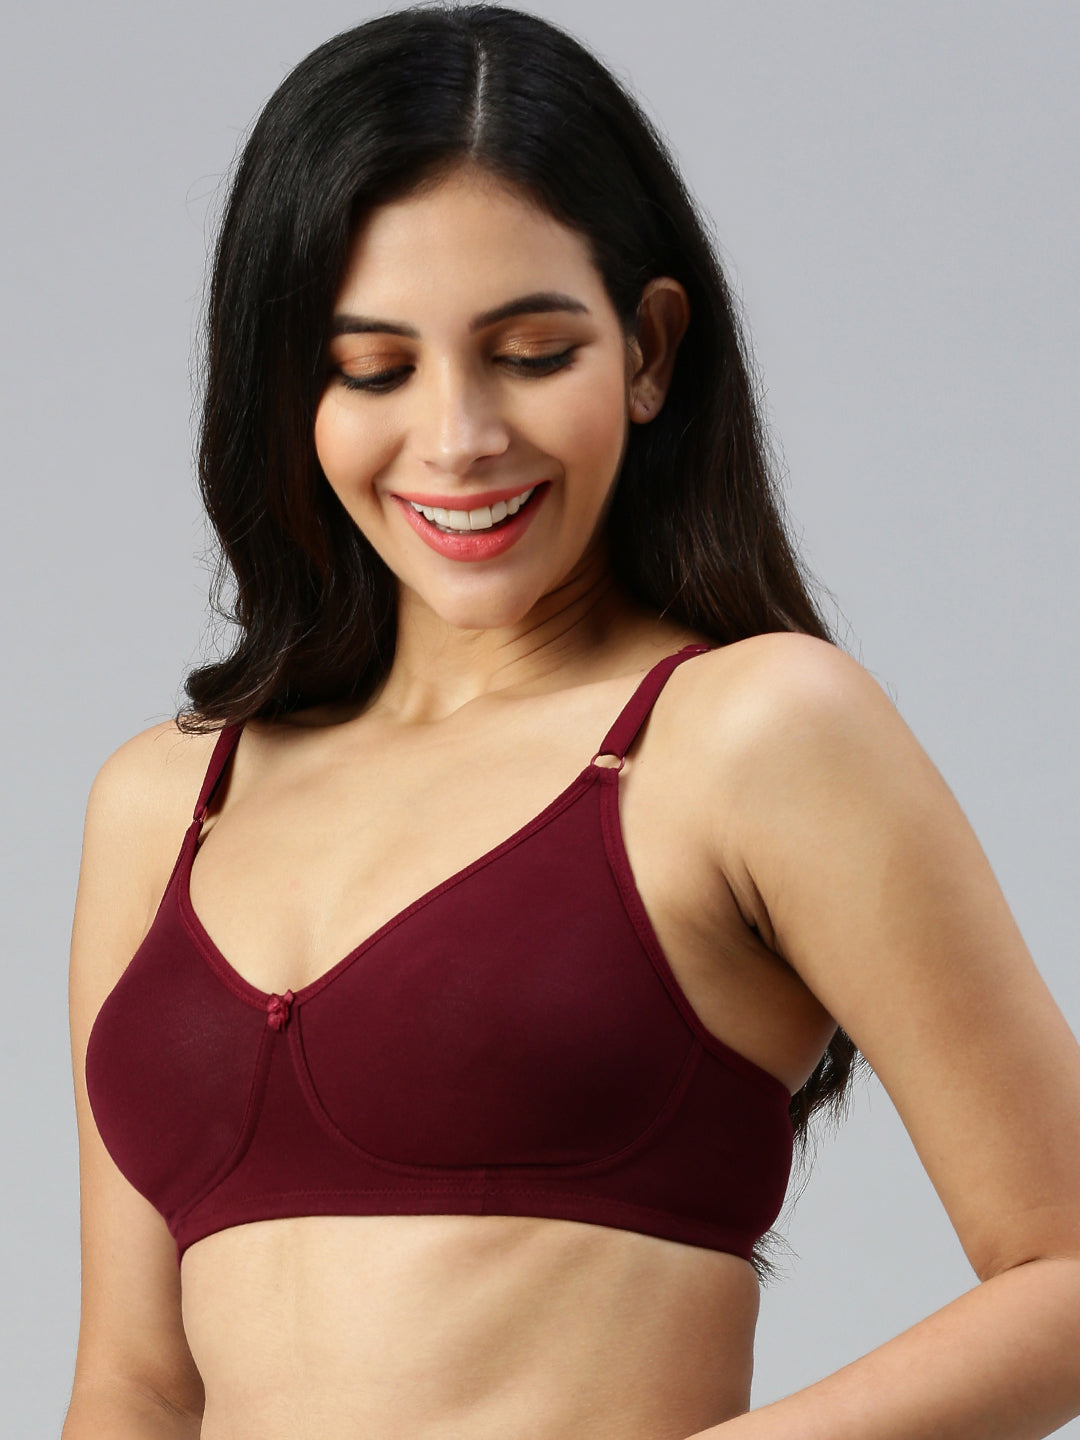 Daily Fit(Moulded Basic Bra)-Peach